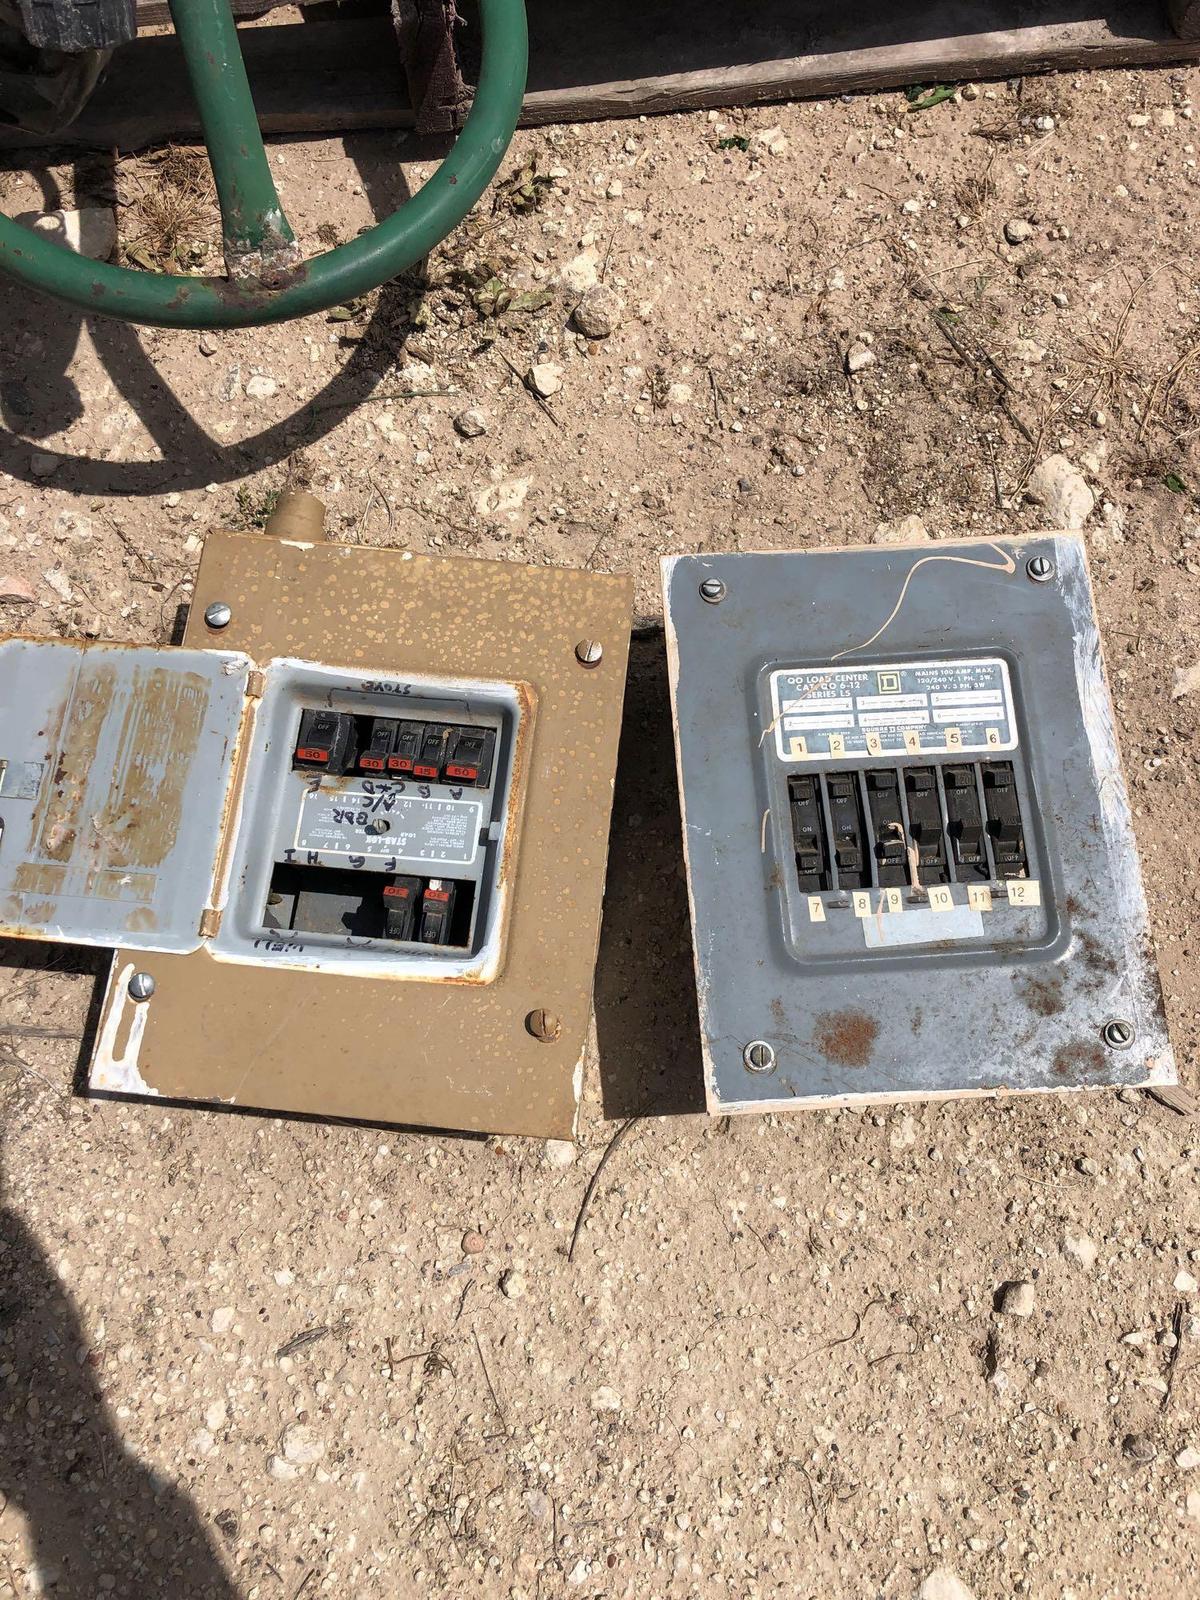 2 breaker boxes and electrical joint